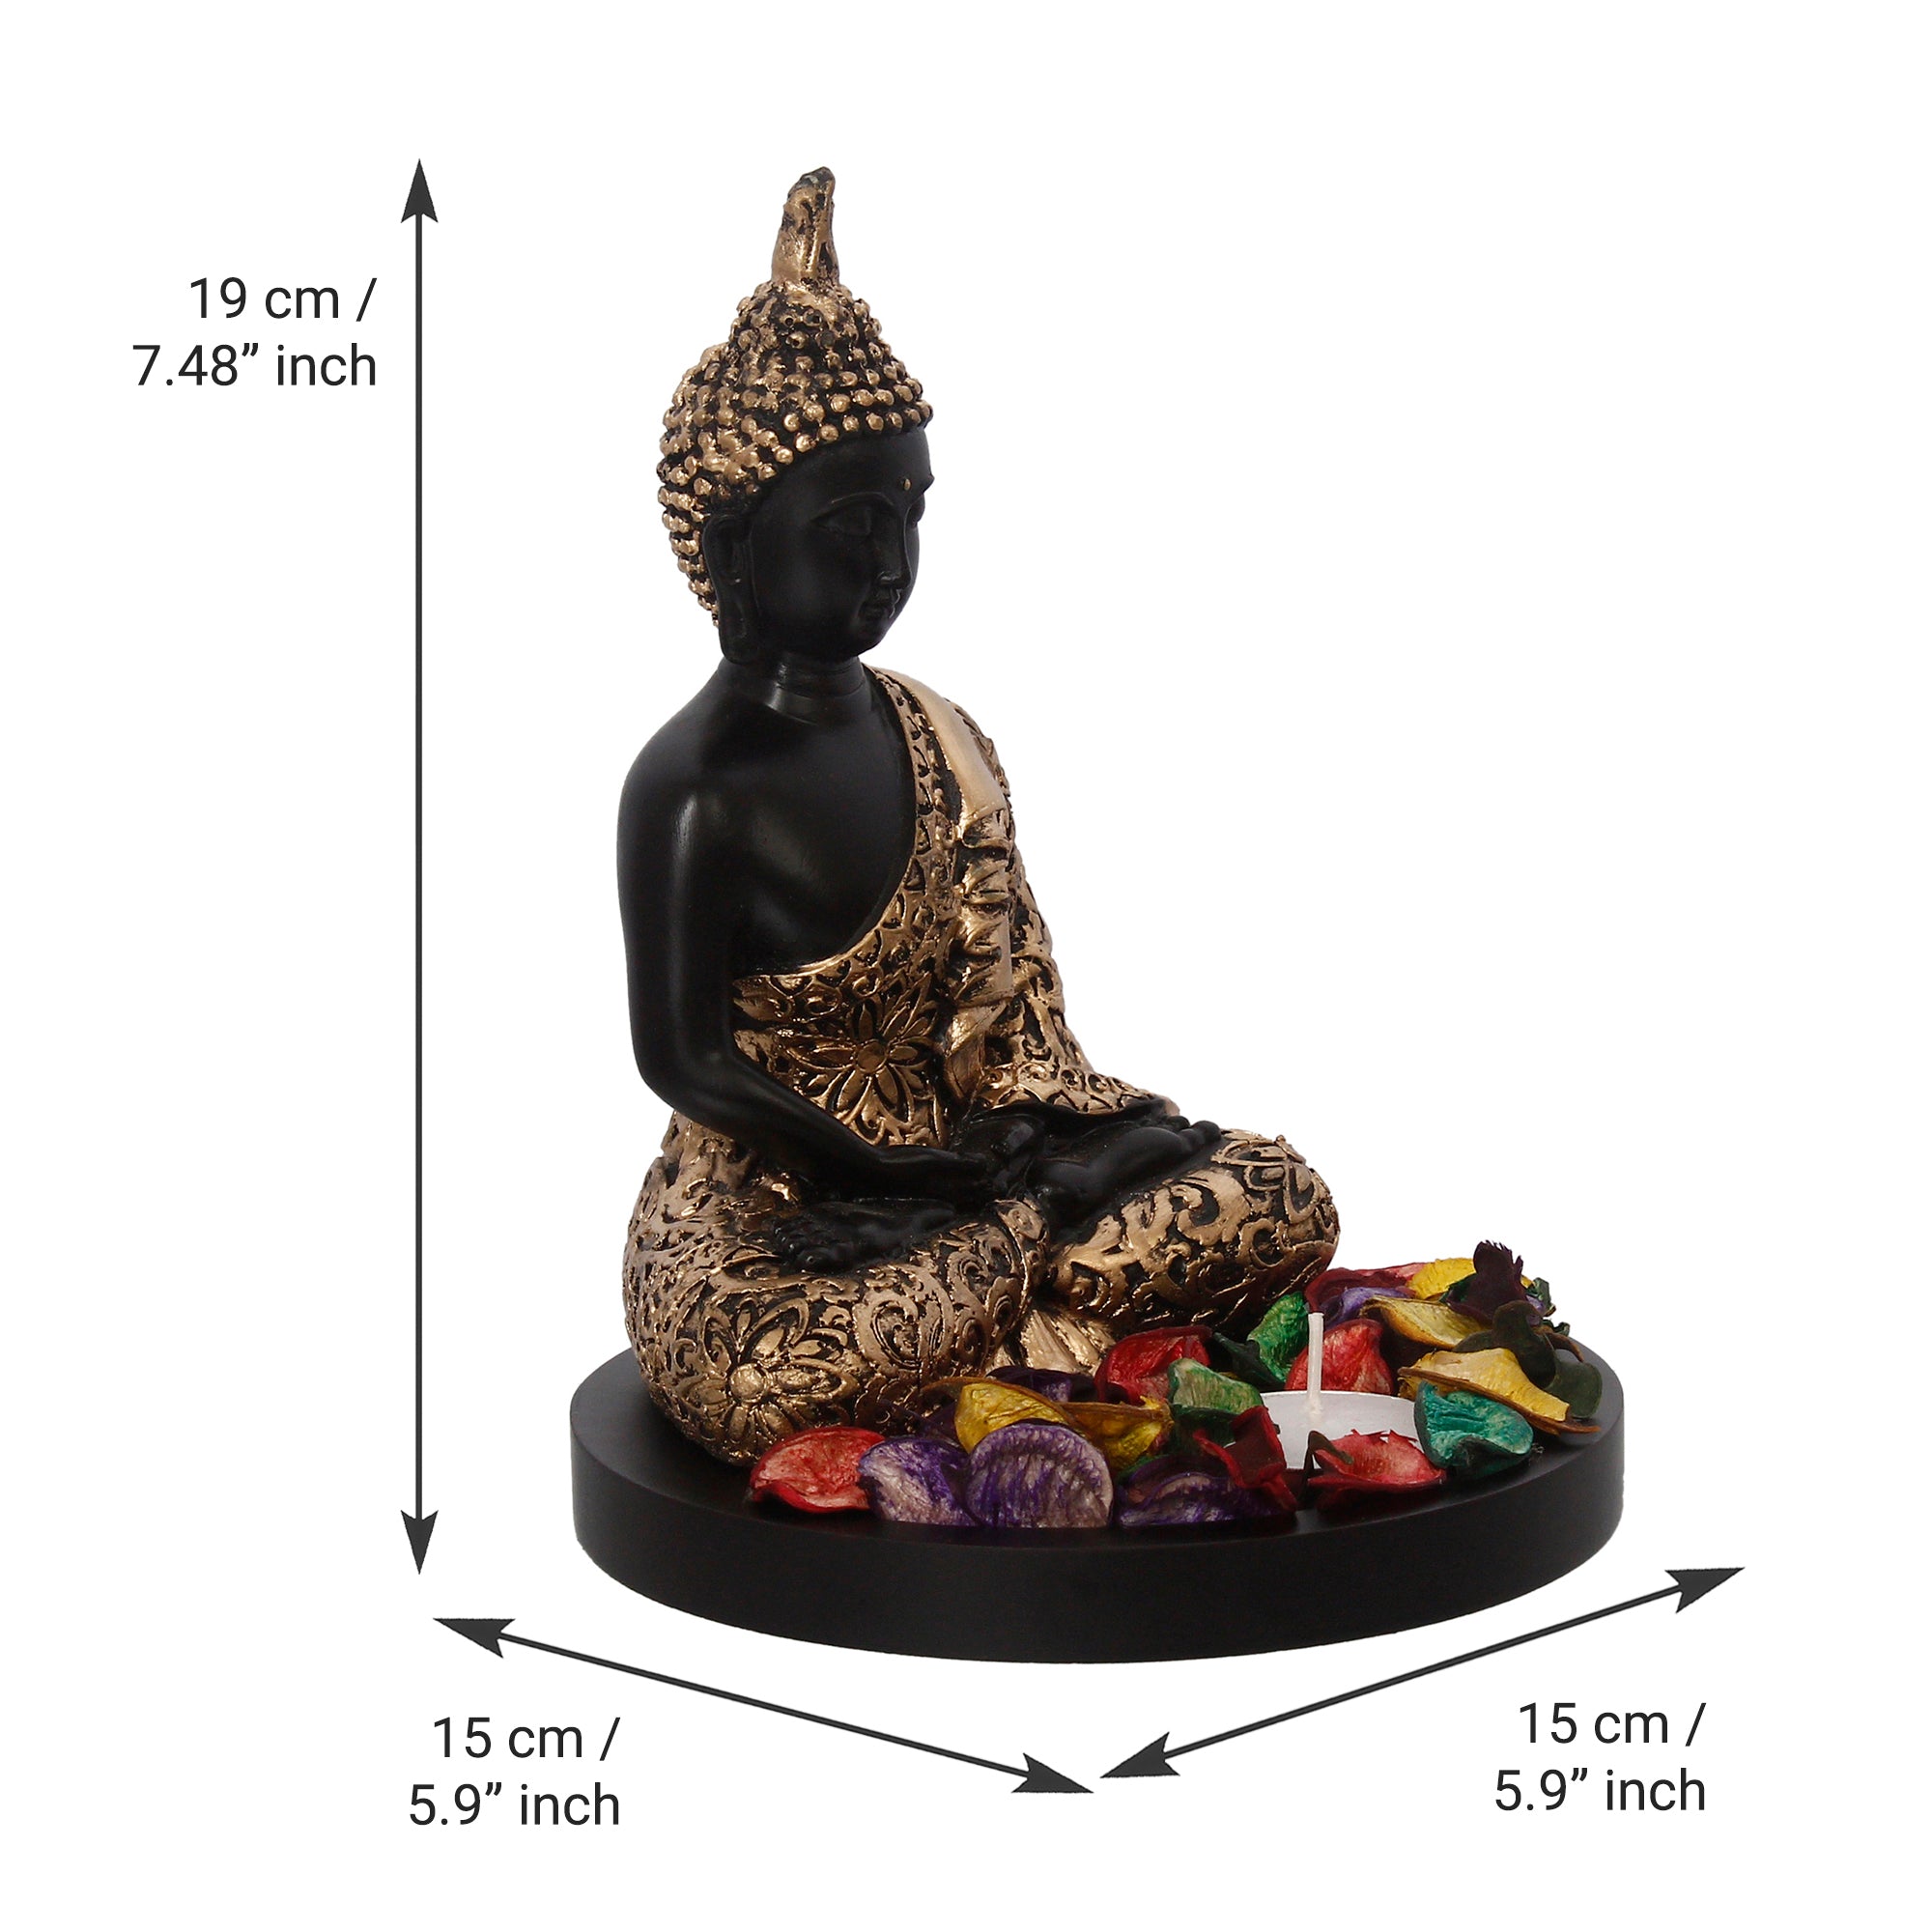 Handcrafted Meditating Golden Buddha Statue with Wooden Base, Fragranced Petals and Tealight 3